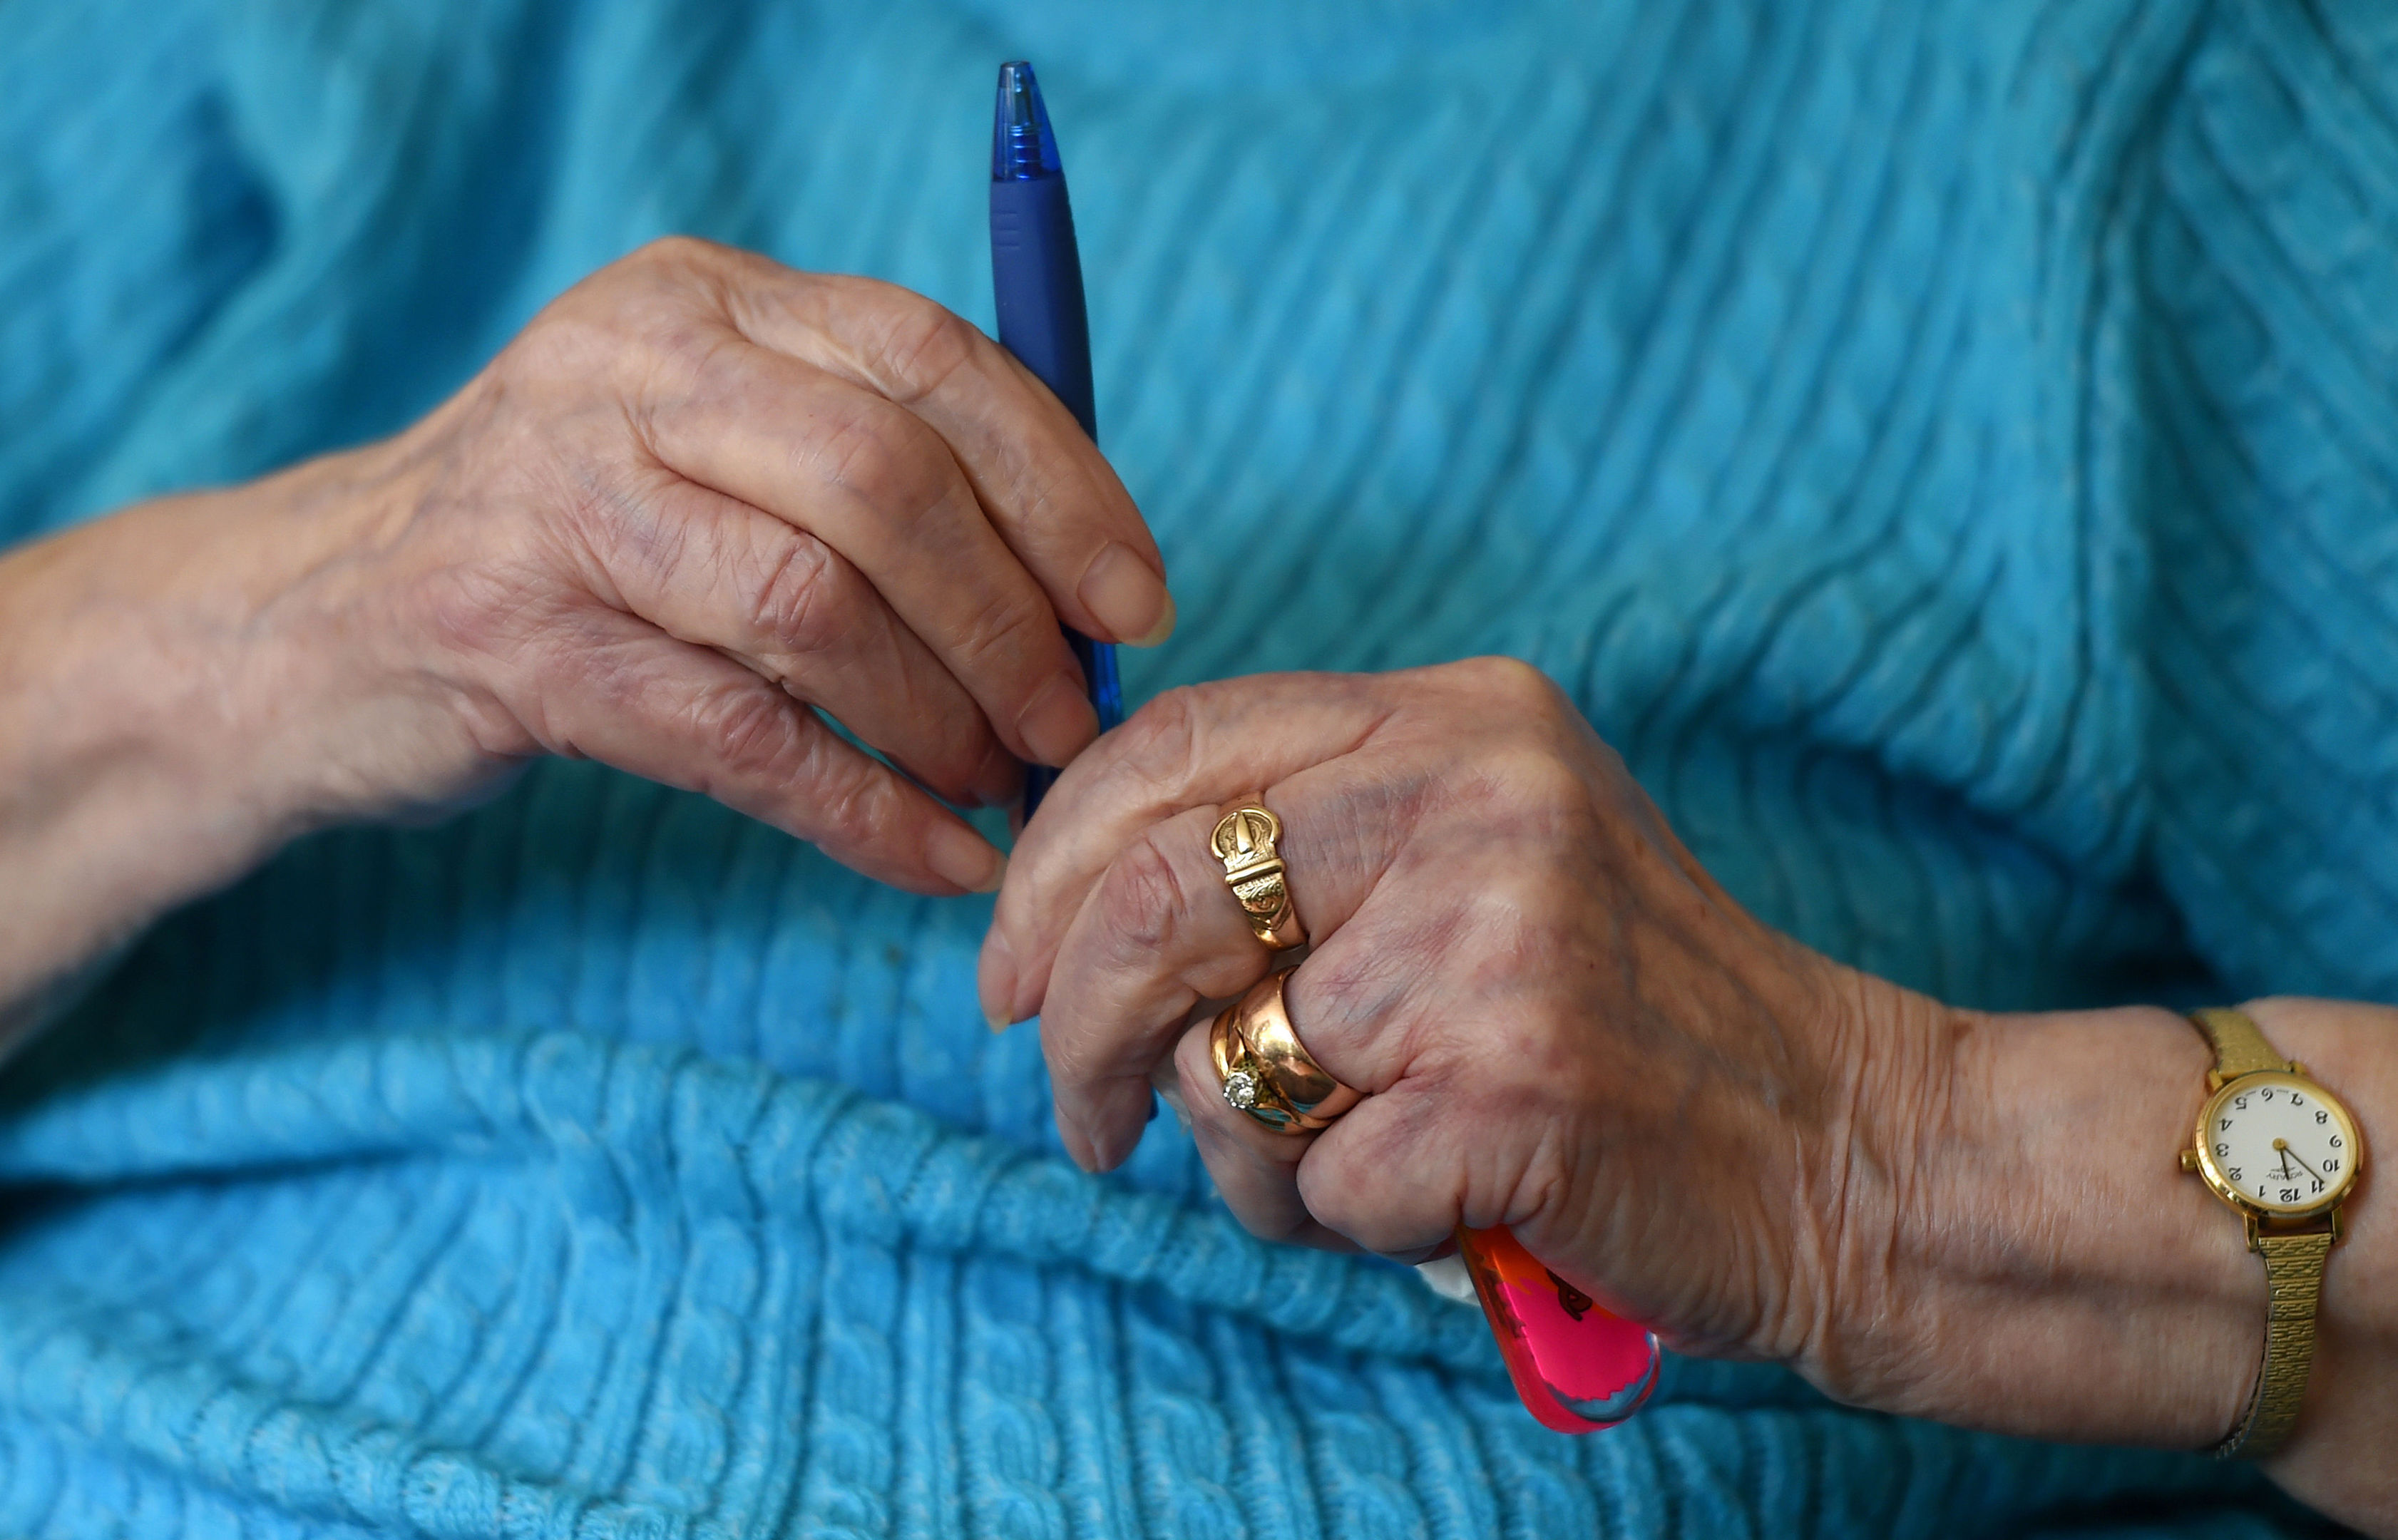 More than two-fifths of older people believe they have been targeted by scammers, with single people more likely to be tricked than their married counterparts, according to a new study. (Joe Giddens/PA Wire)